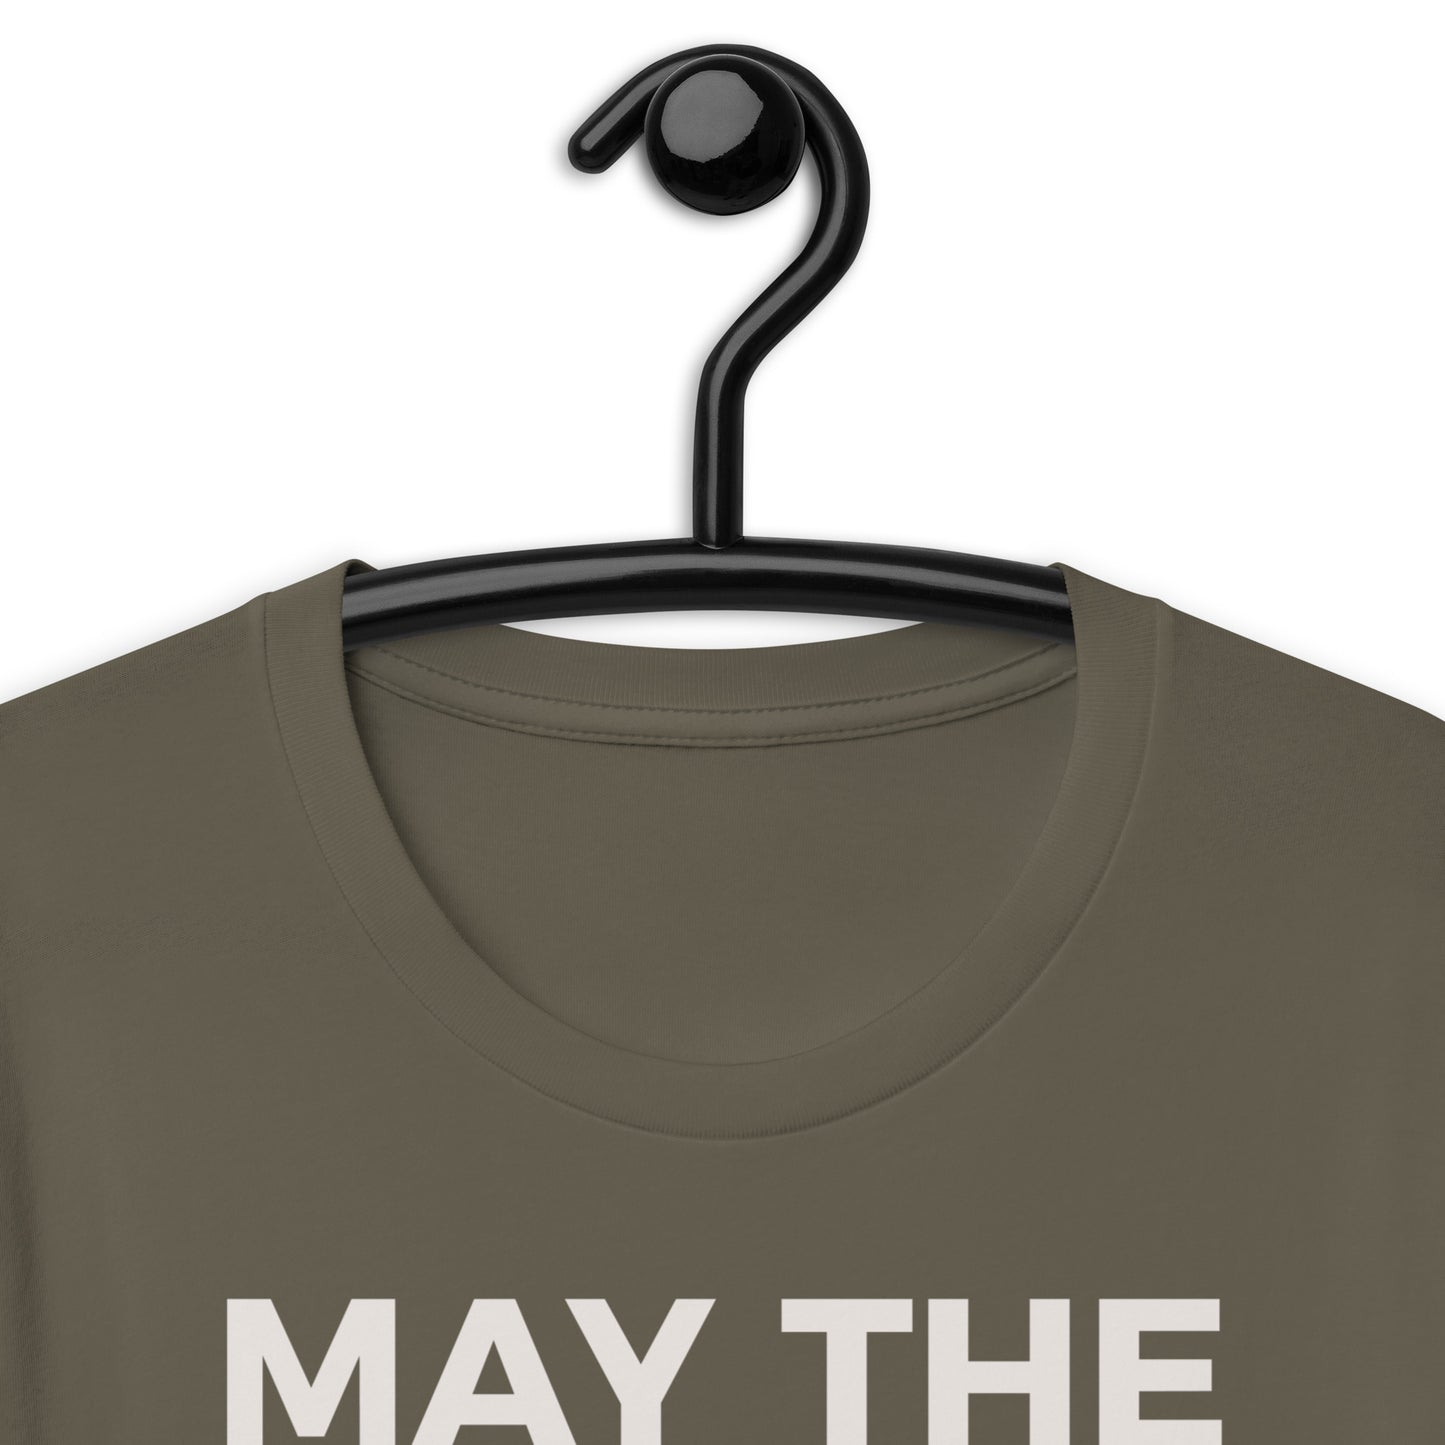 May The Forest Be With You T-Shirt